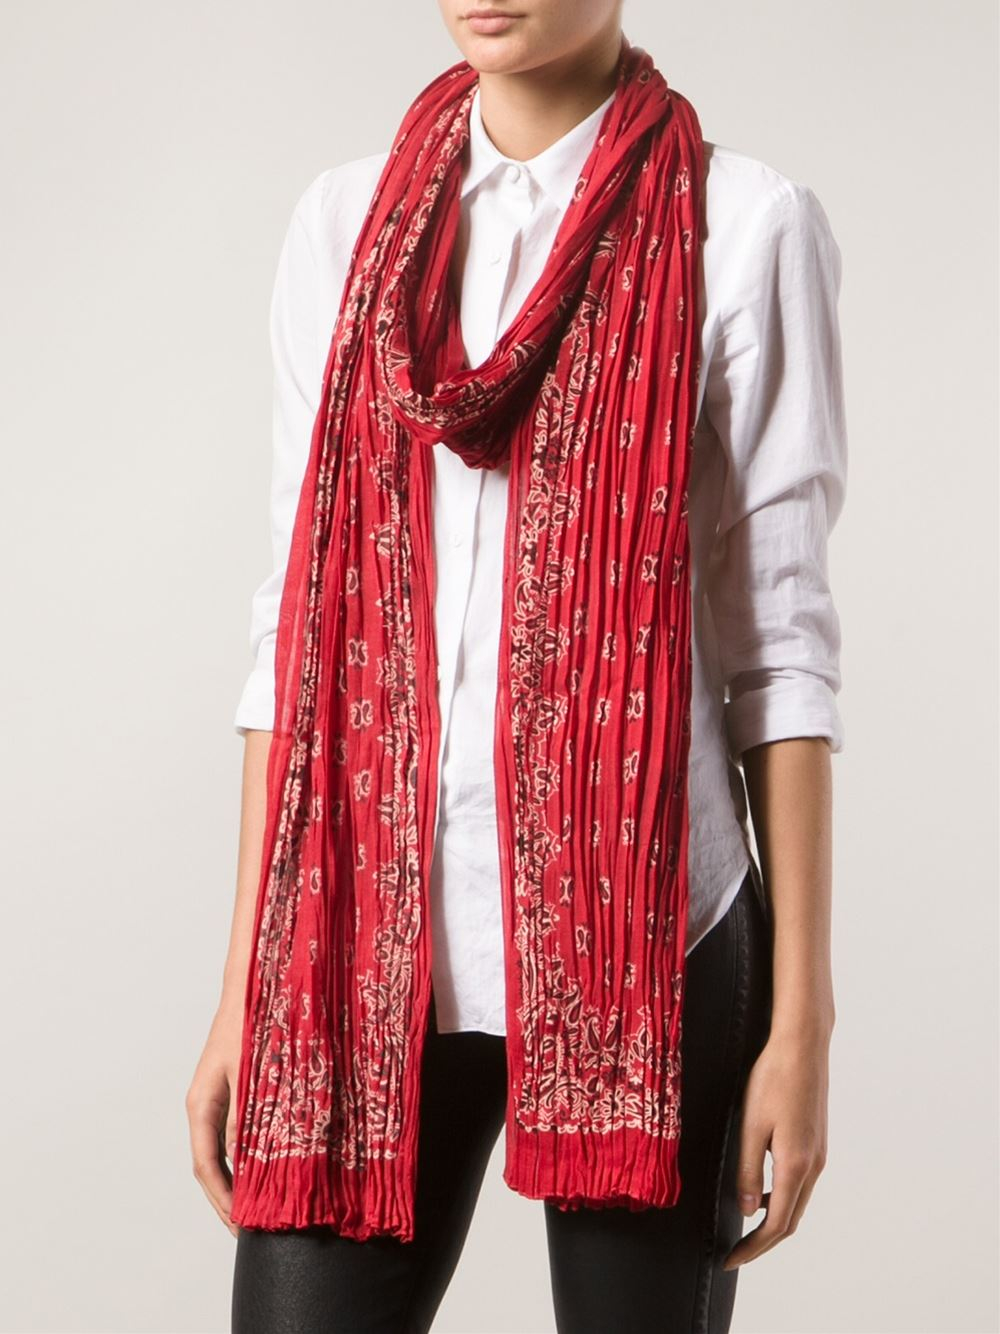 Saint Laurent Paisley Print Scarf in Red | Lyst